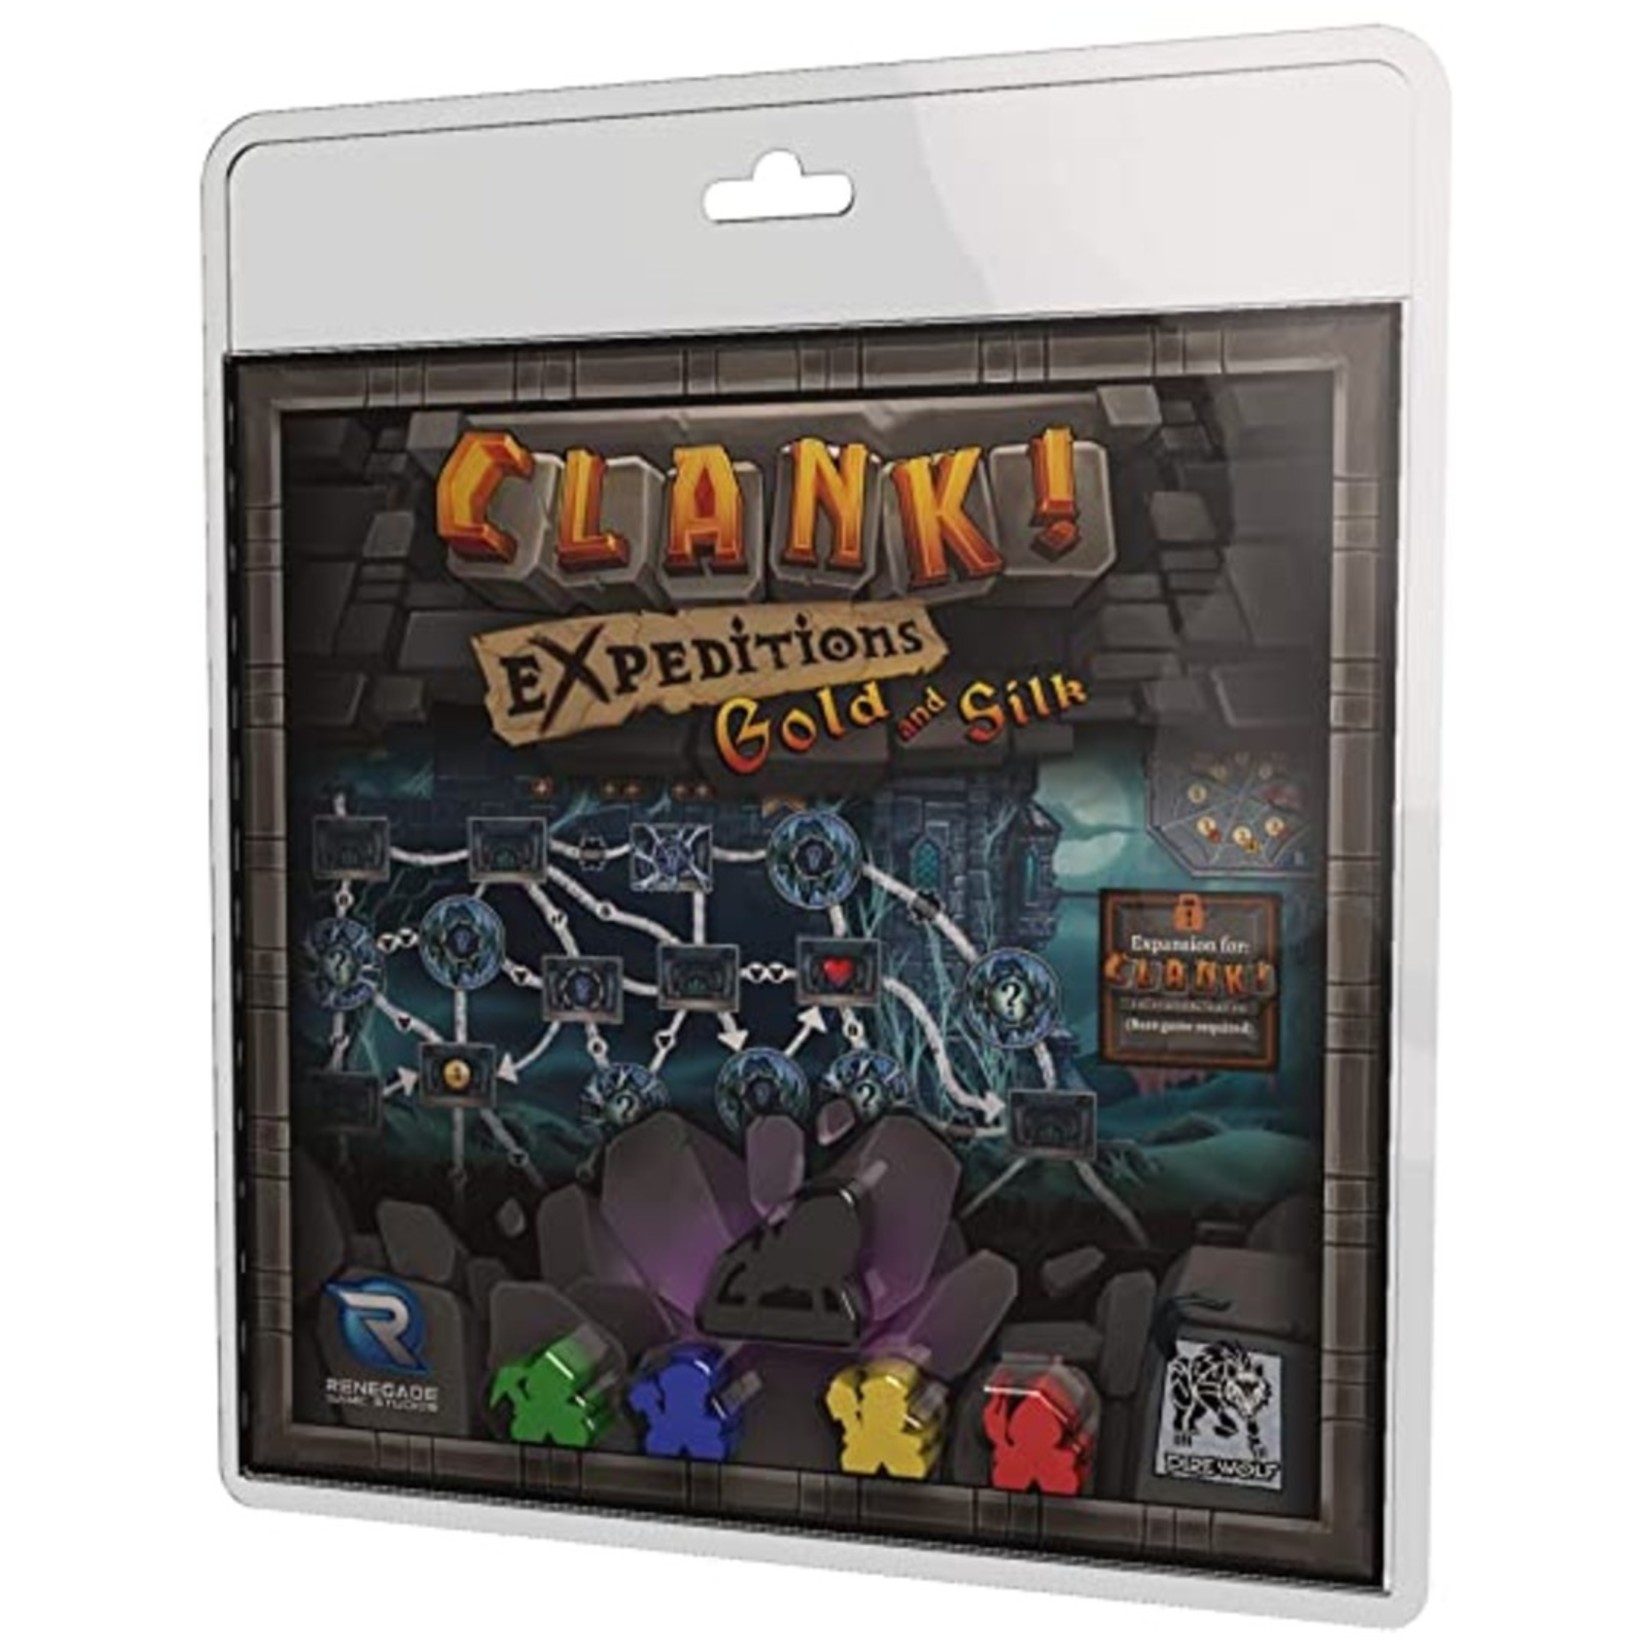 Dire Wolf Digital Clank! Expeditions Gold and Silk